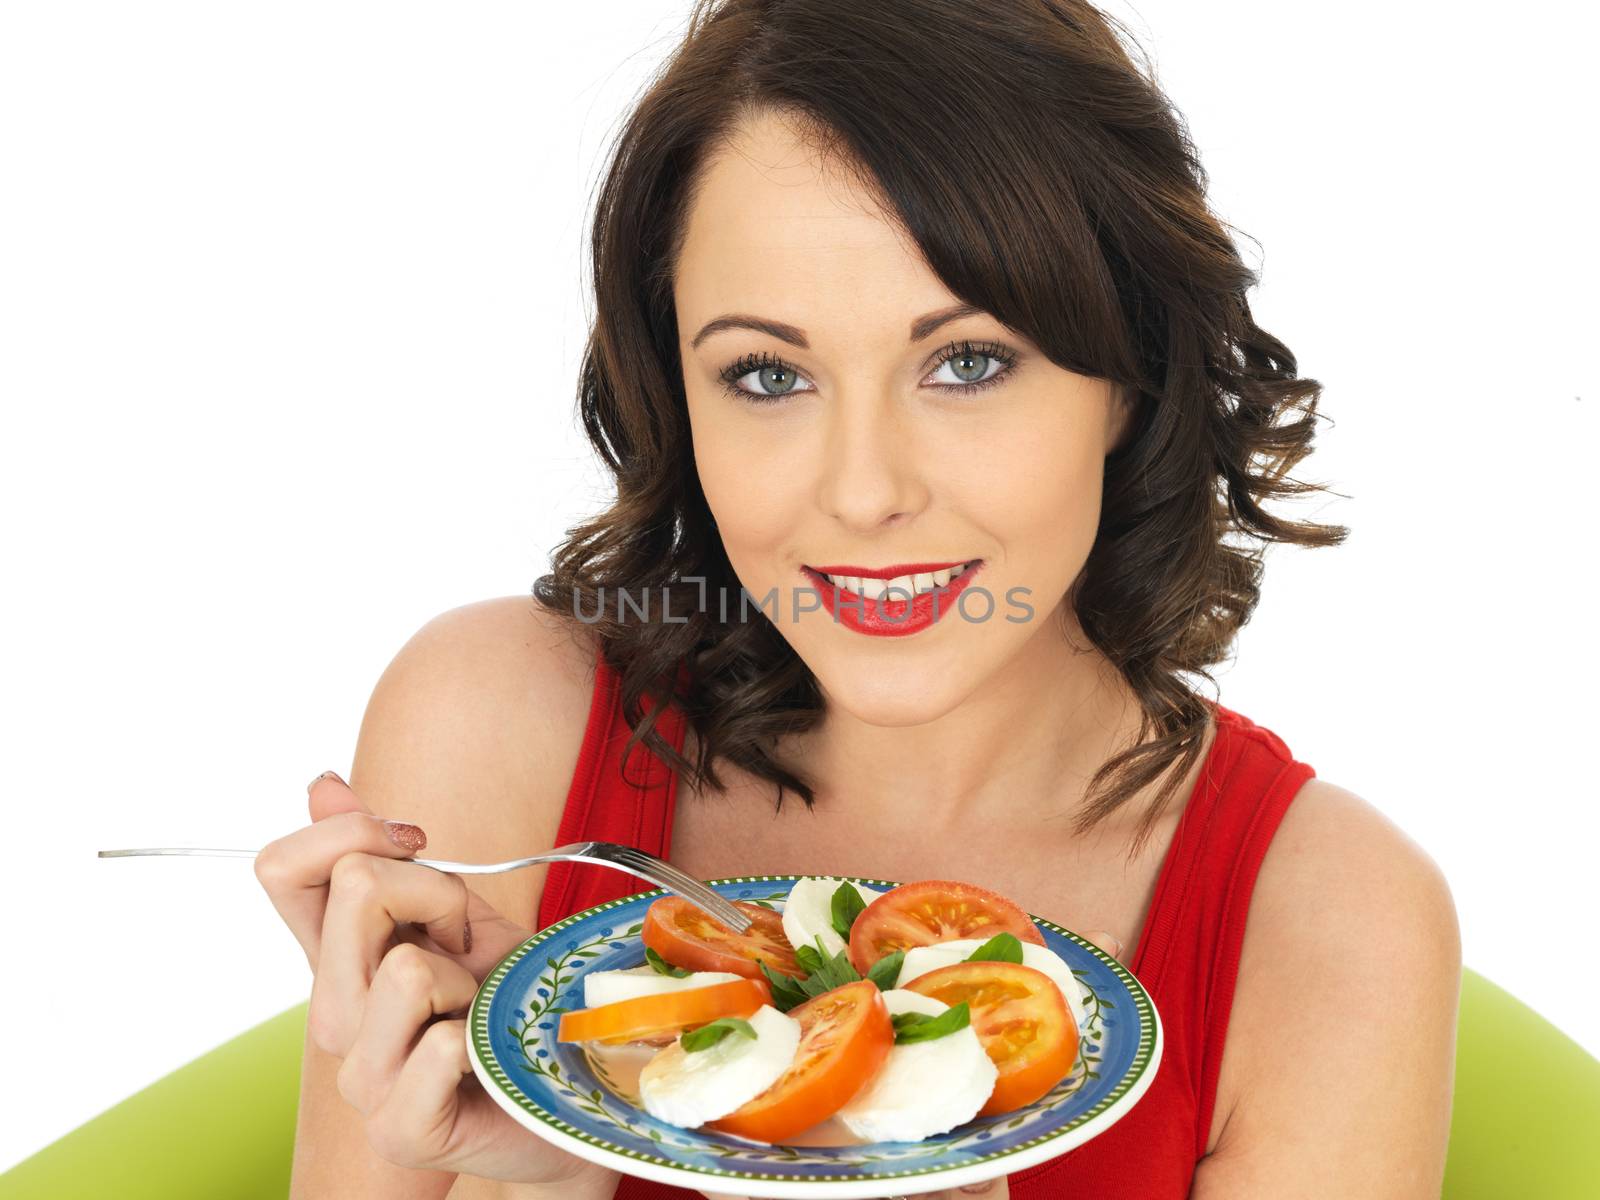 Young Woman Eating a Mozzarella Cheese and Tomato Salad by Whiteboxmedia